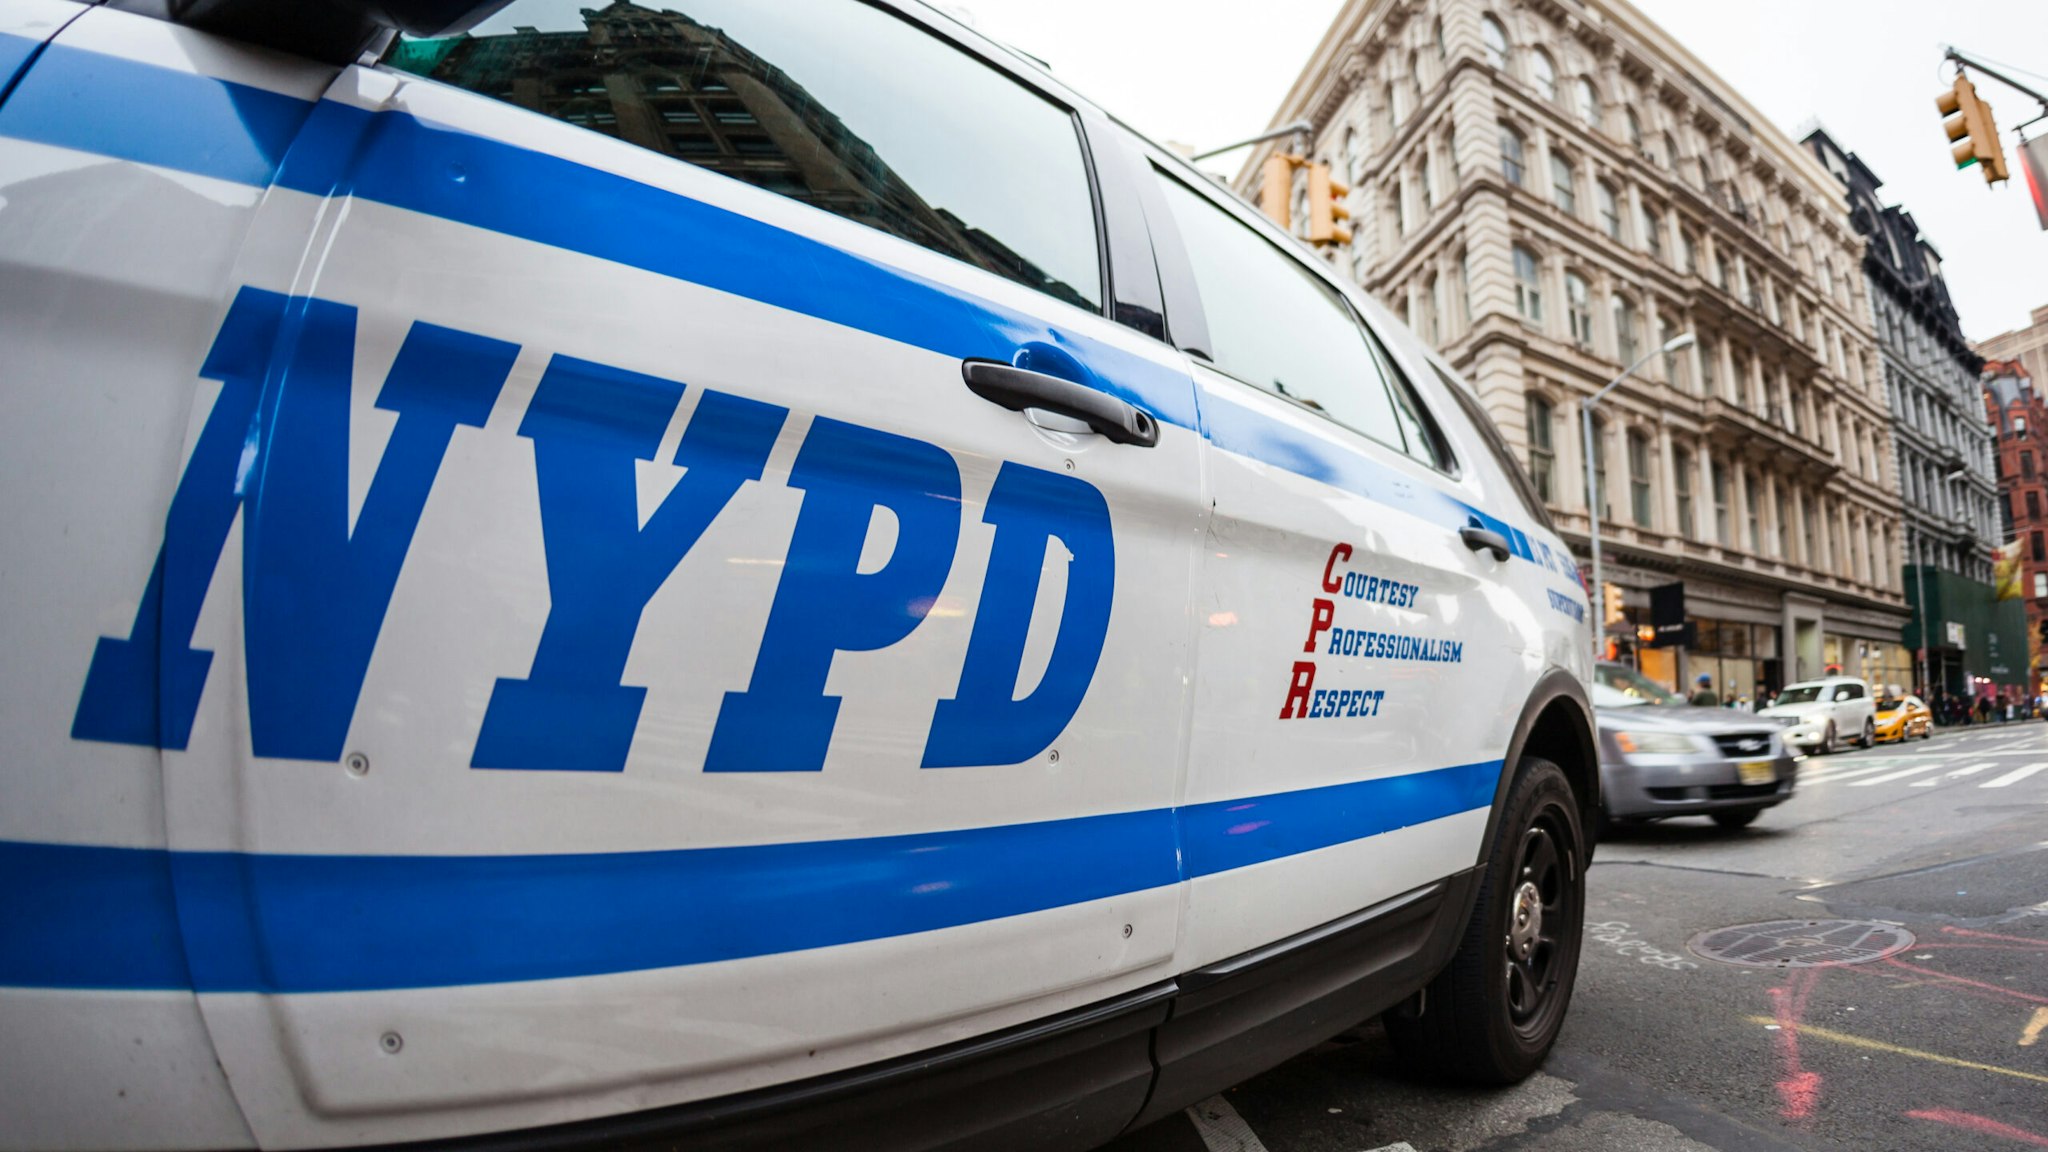 Close up of the NYPD logo on a police car.